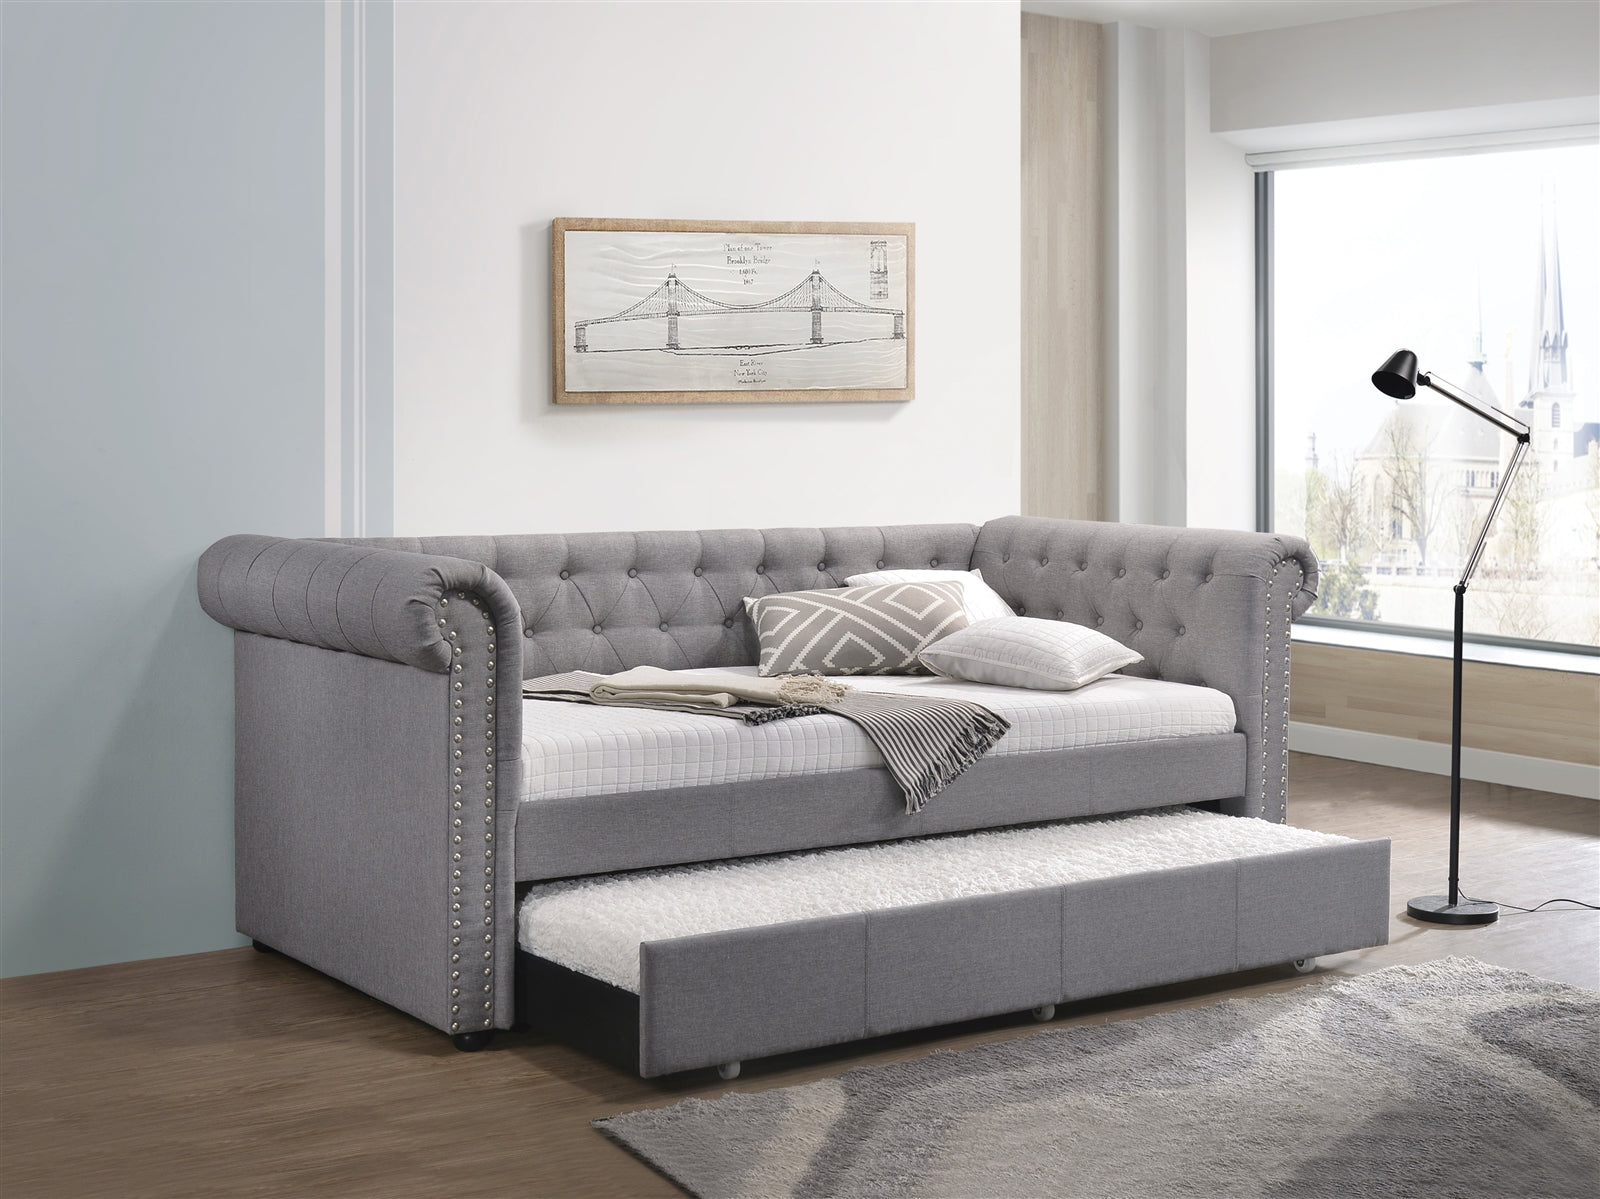 Justice Chesterfield Style Daybed in Light Gray